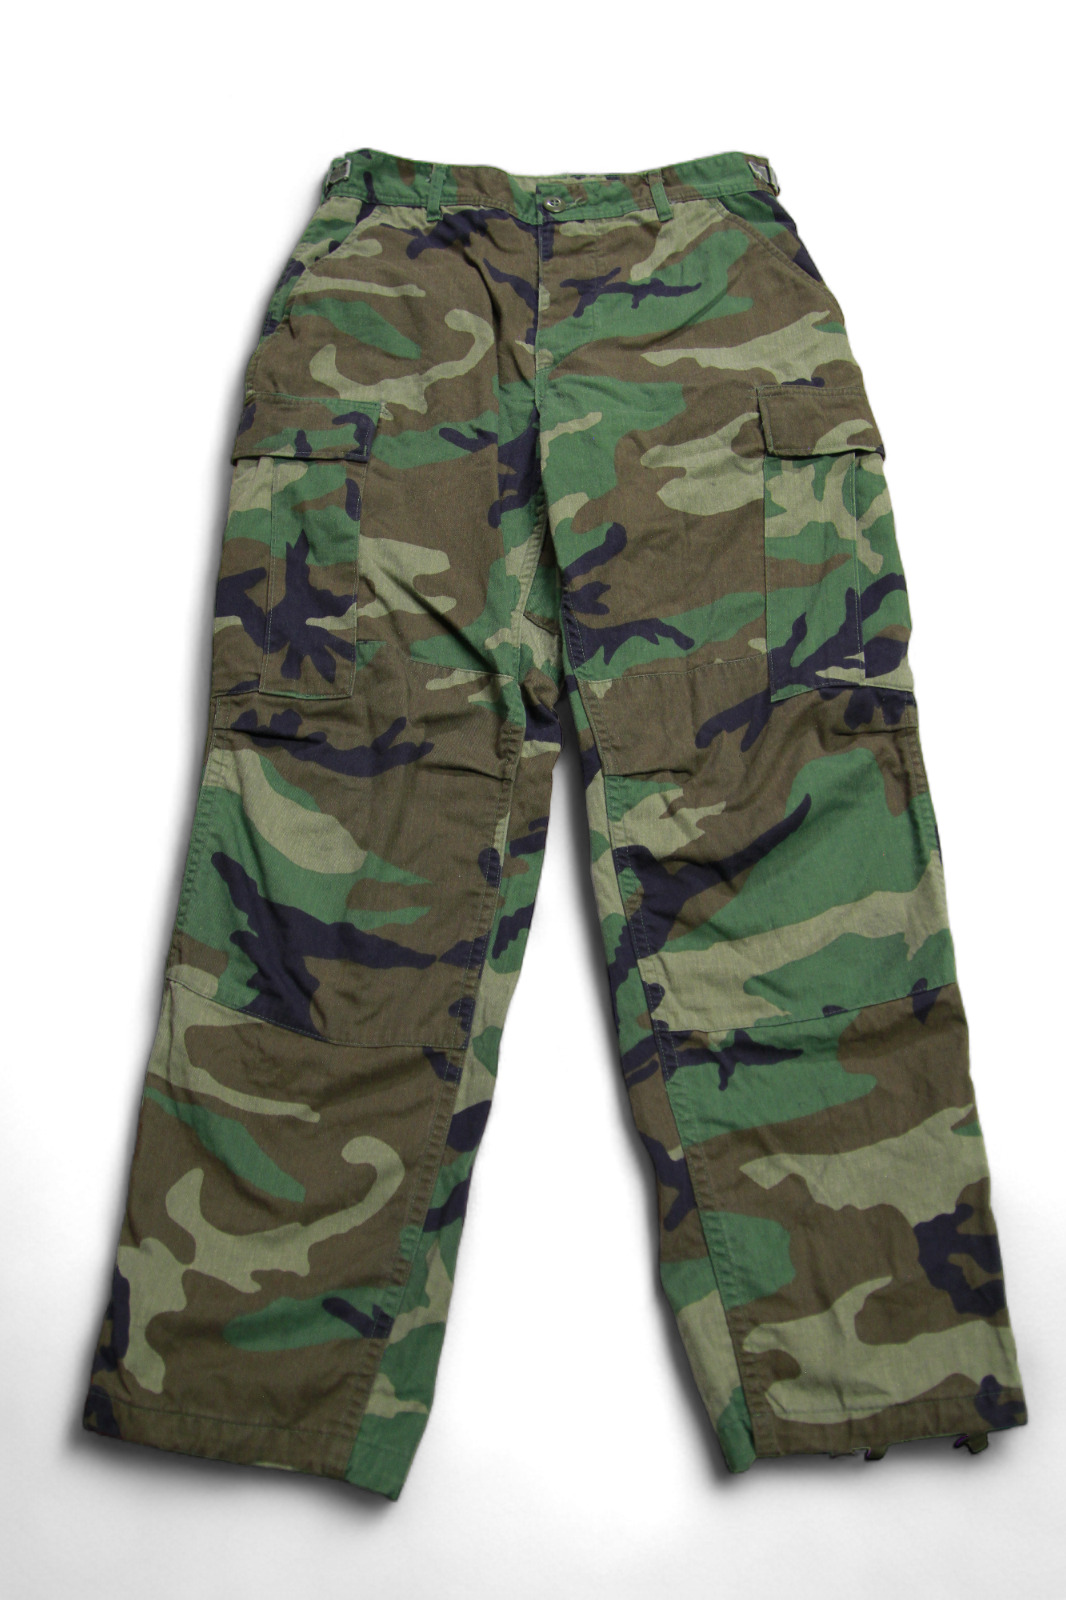 US Army Genuine Trousers BDU Camoflauge Adjustable Pants NSN 8415-01 Small-Short